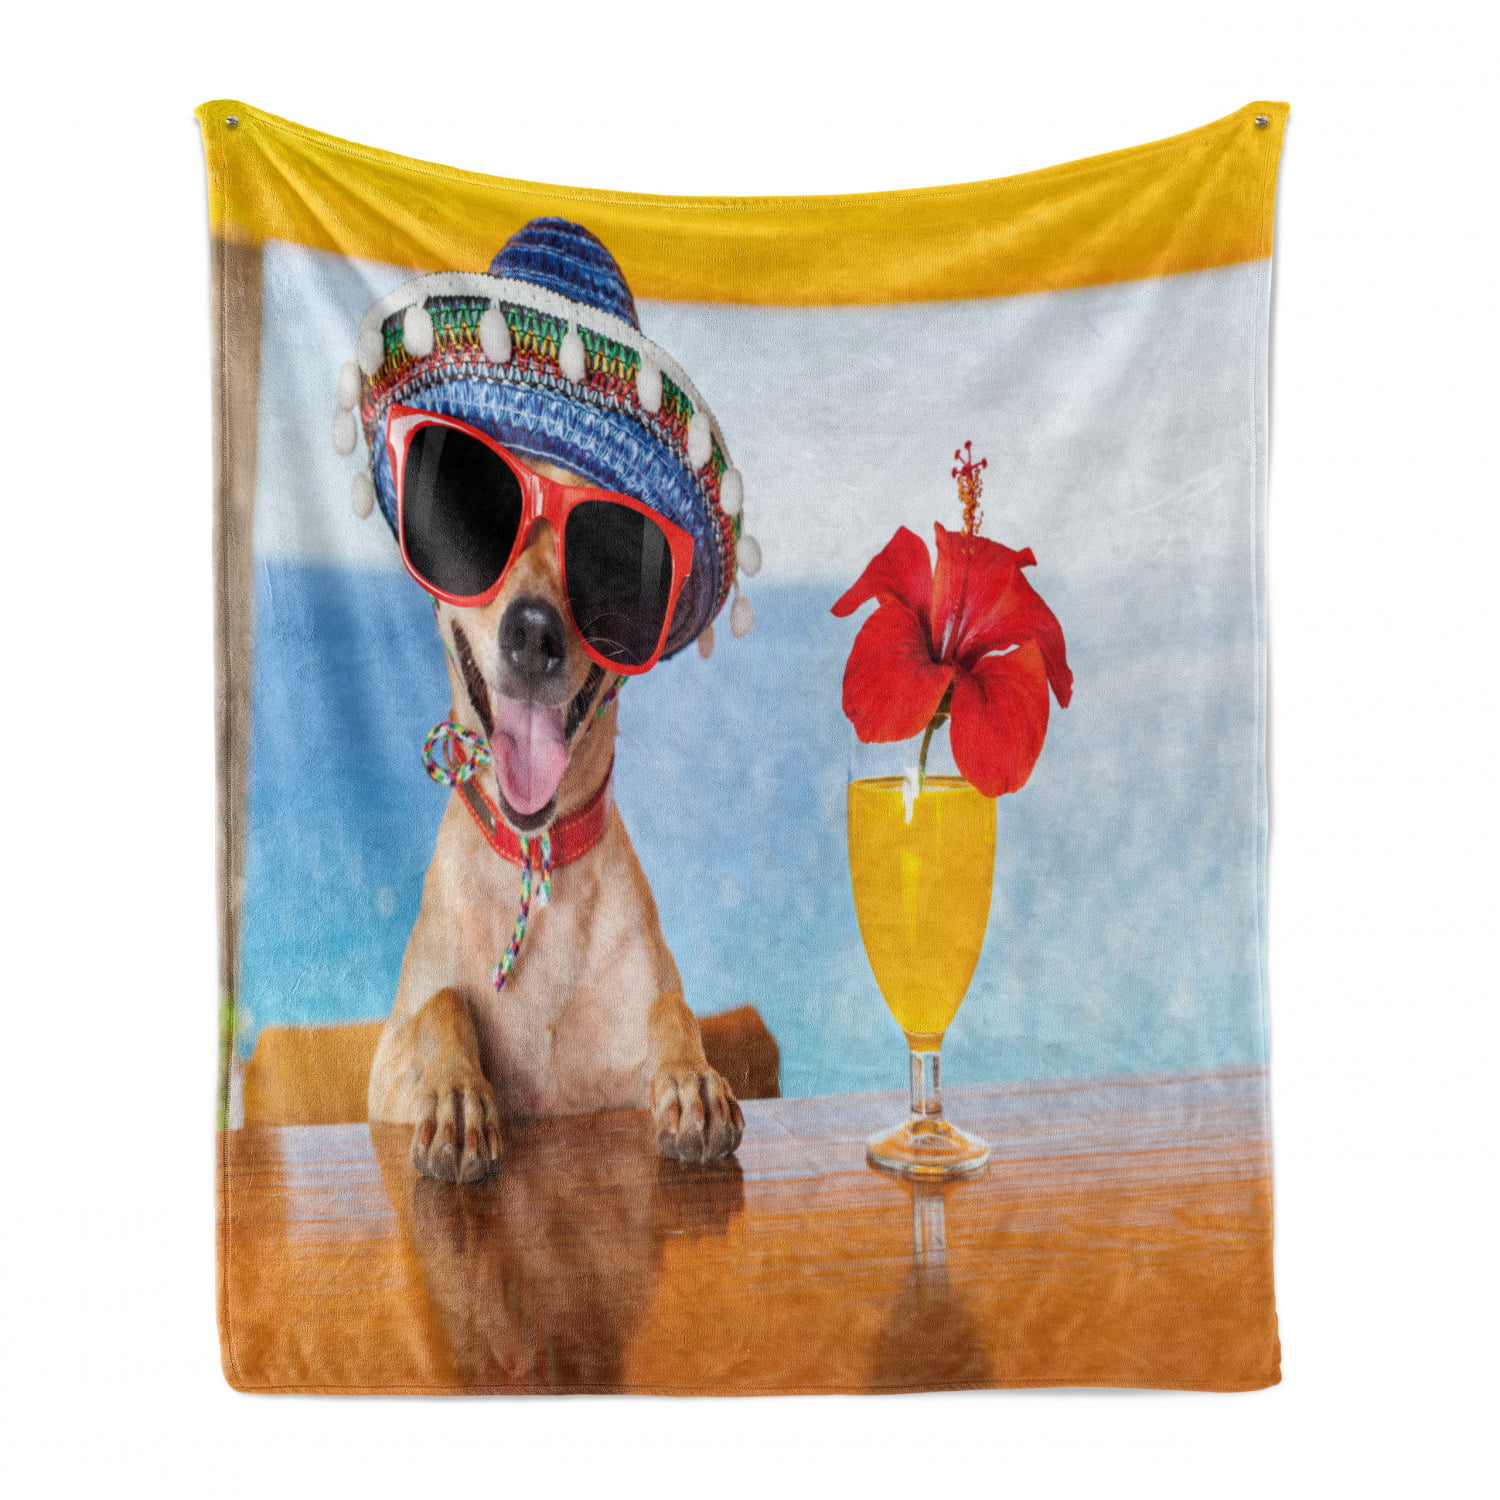 Summertime Tropical Club Related Chihuahua Dog Drinking Cocktails at Ocean View Bar Cozy Plush for Indoor and Outdoor Use Ambesonne Funny Soft Flannel Fleece Throw Blanket 60 x 80 Multicolor